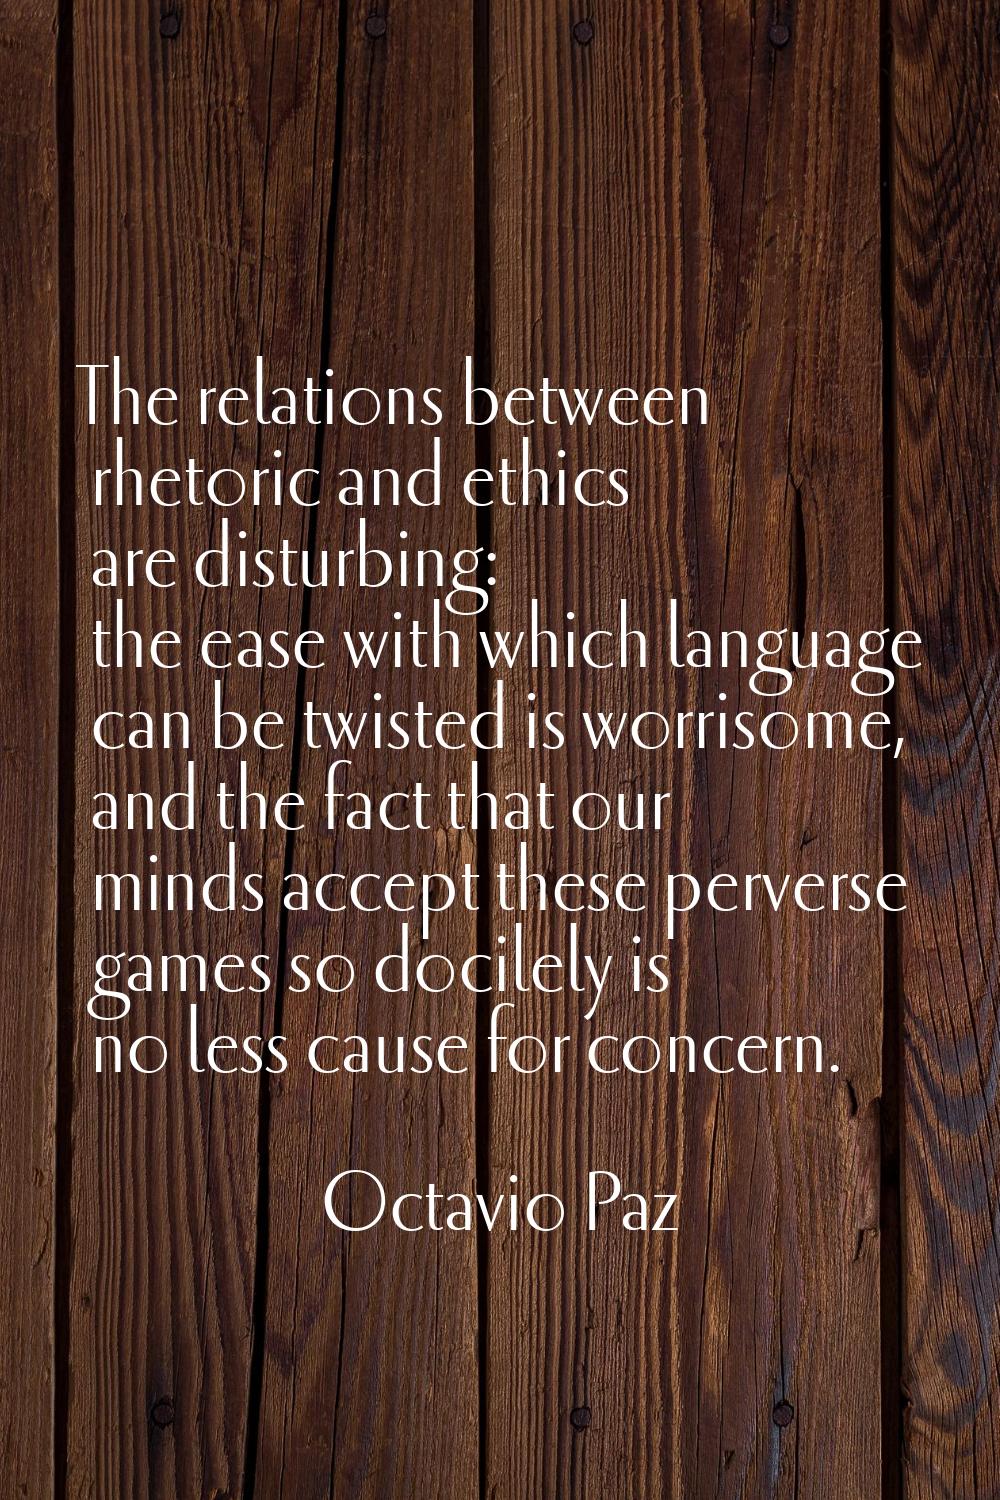 The relations between rhetoric and ethics are disturbing: the ease with which language can be twist